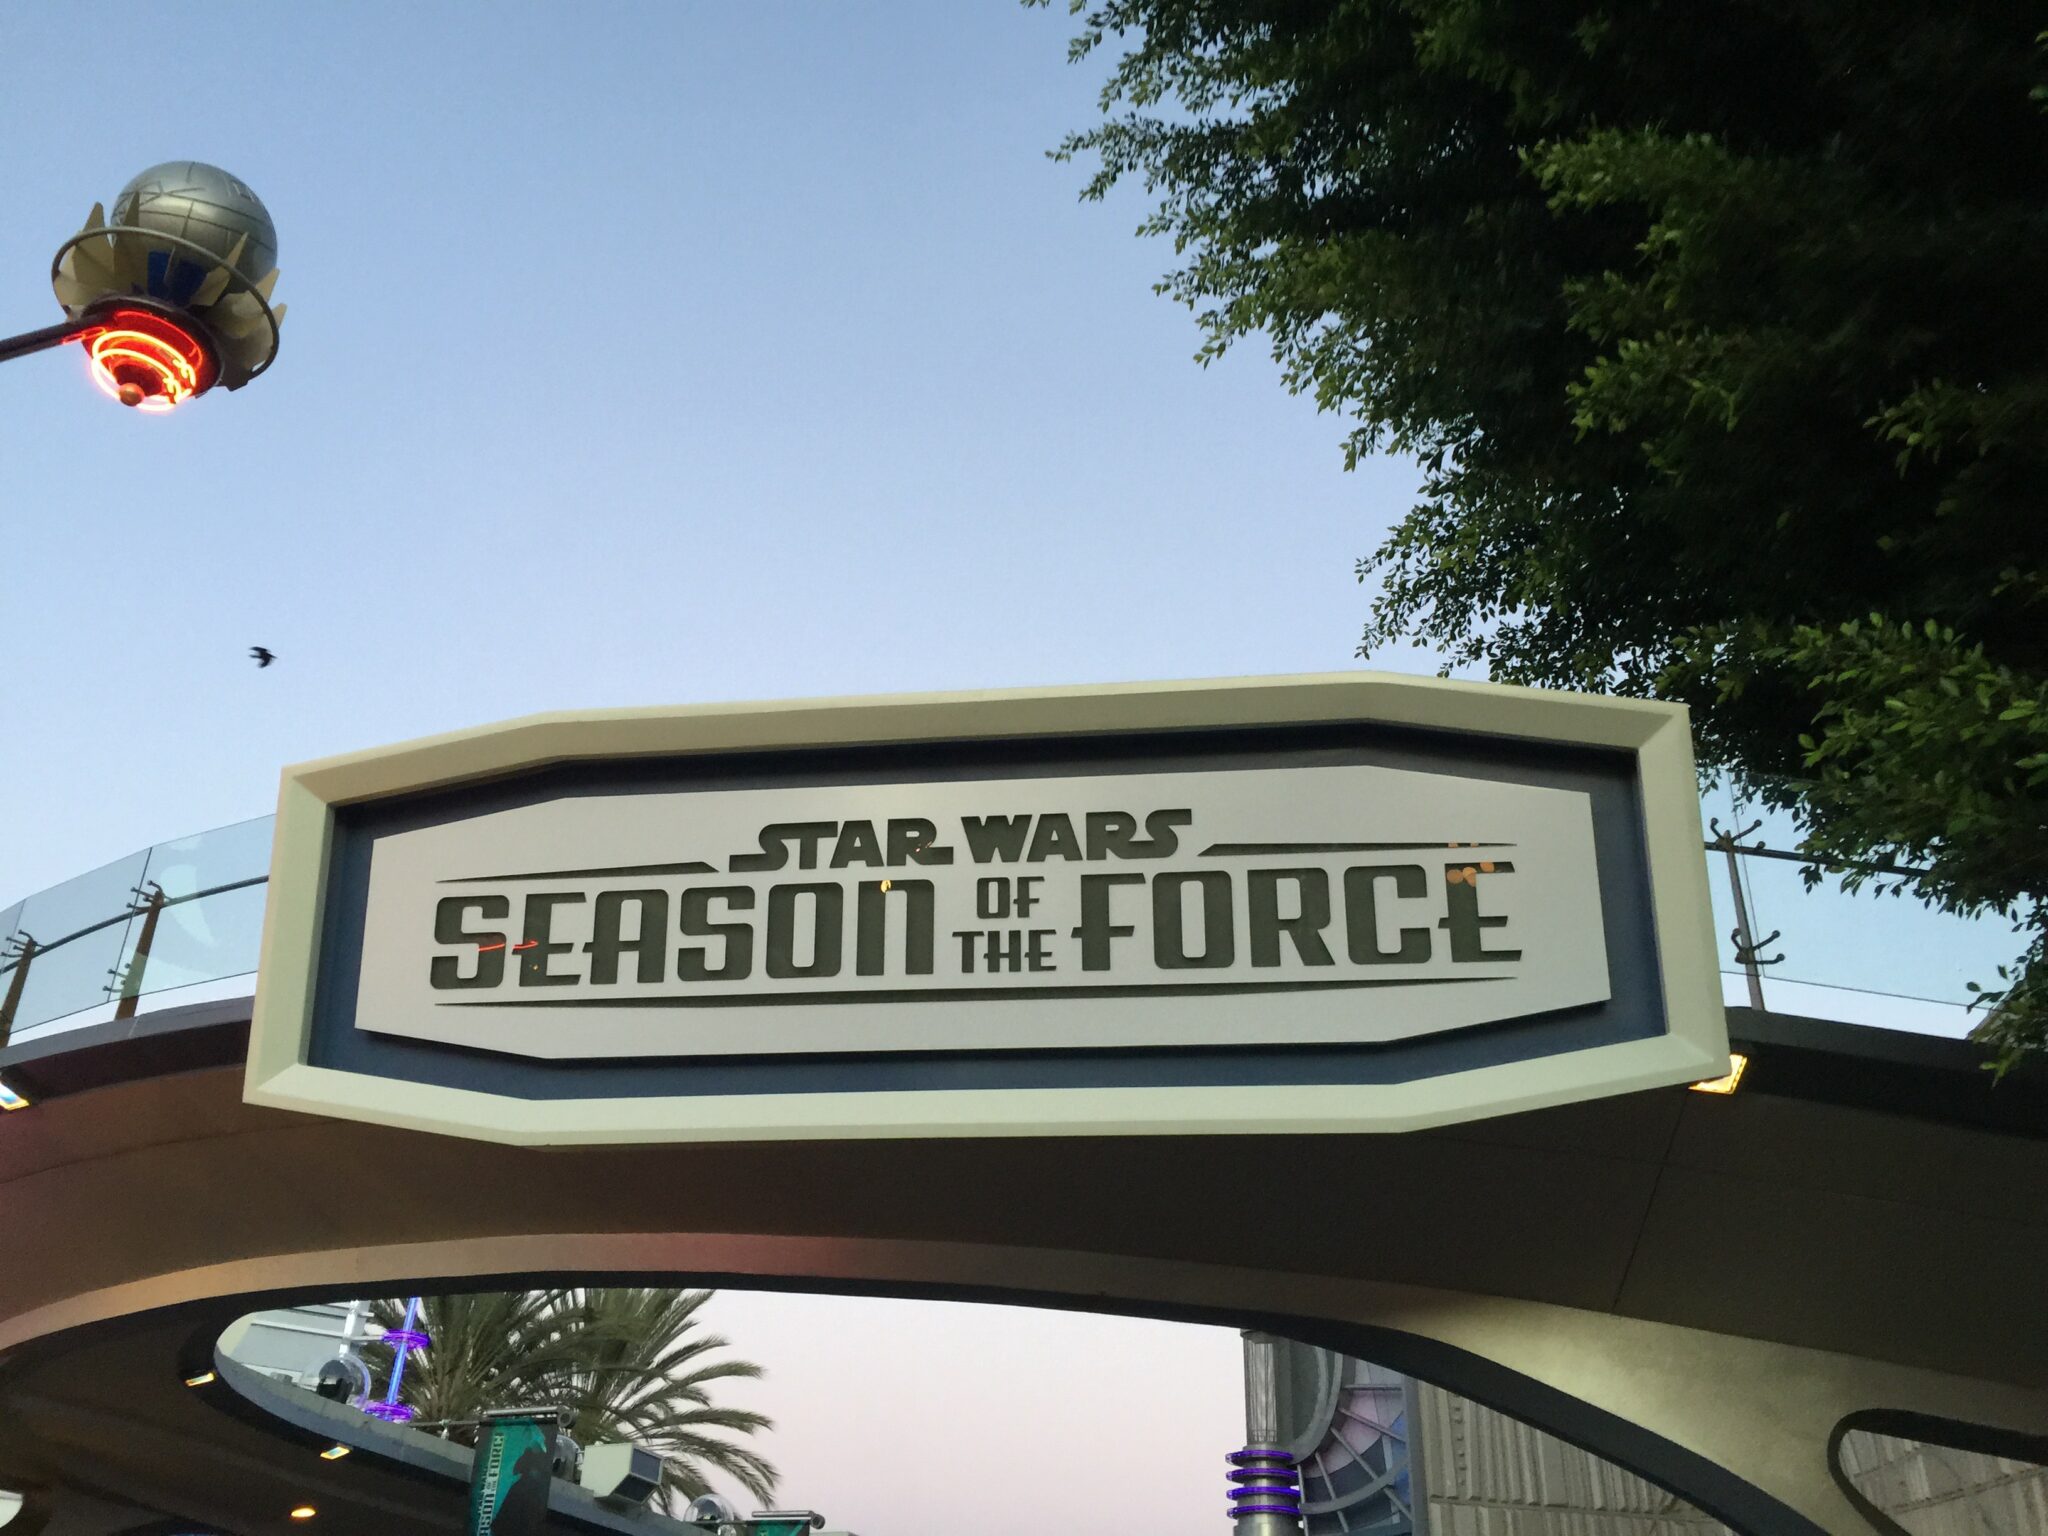 Season of the Force Takes Over Tomorrowland at Disneyland